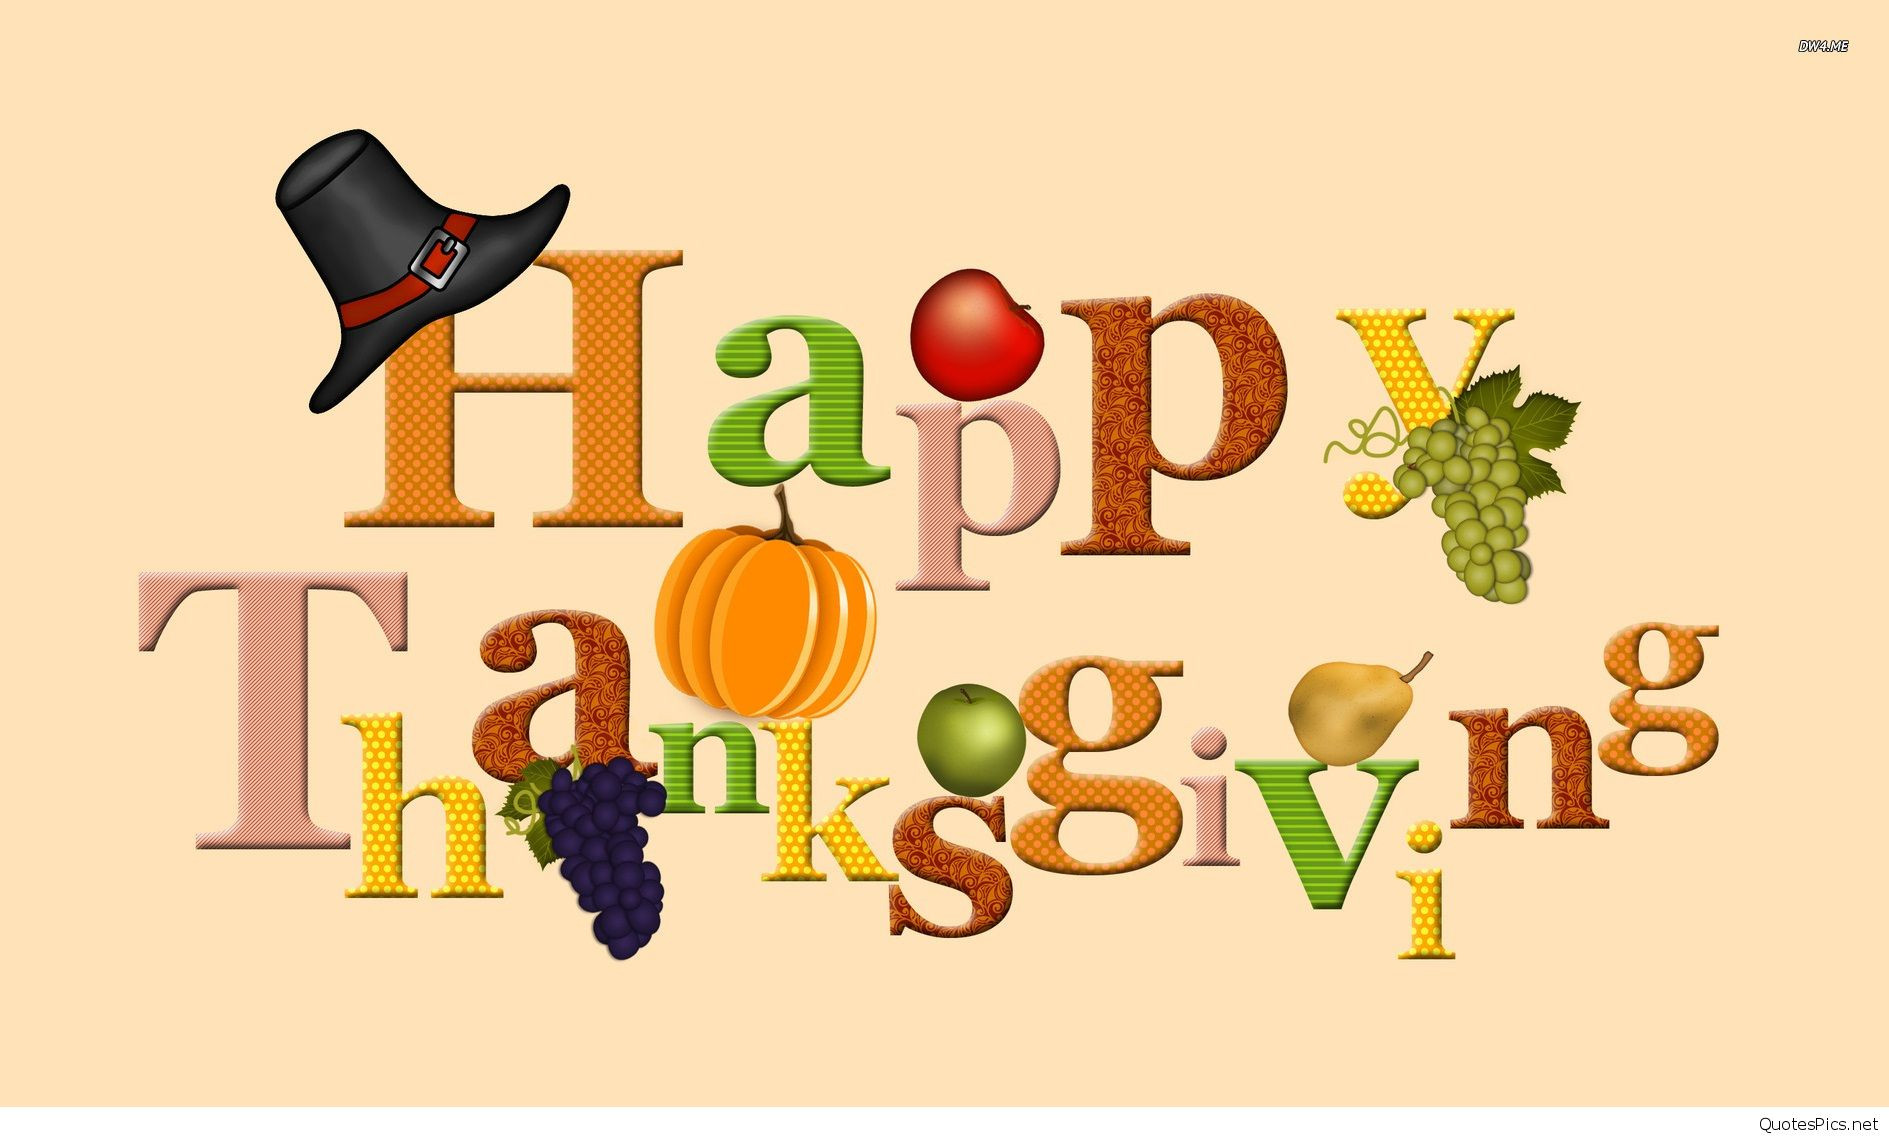 Thanksgiving Quotes Couple
 Cute Happy Thanksgiving wallpapers quotes images 2016 2017